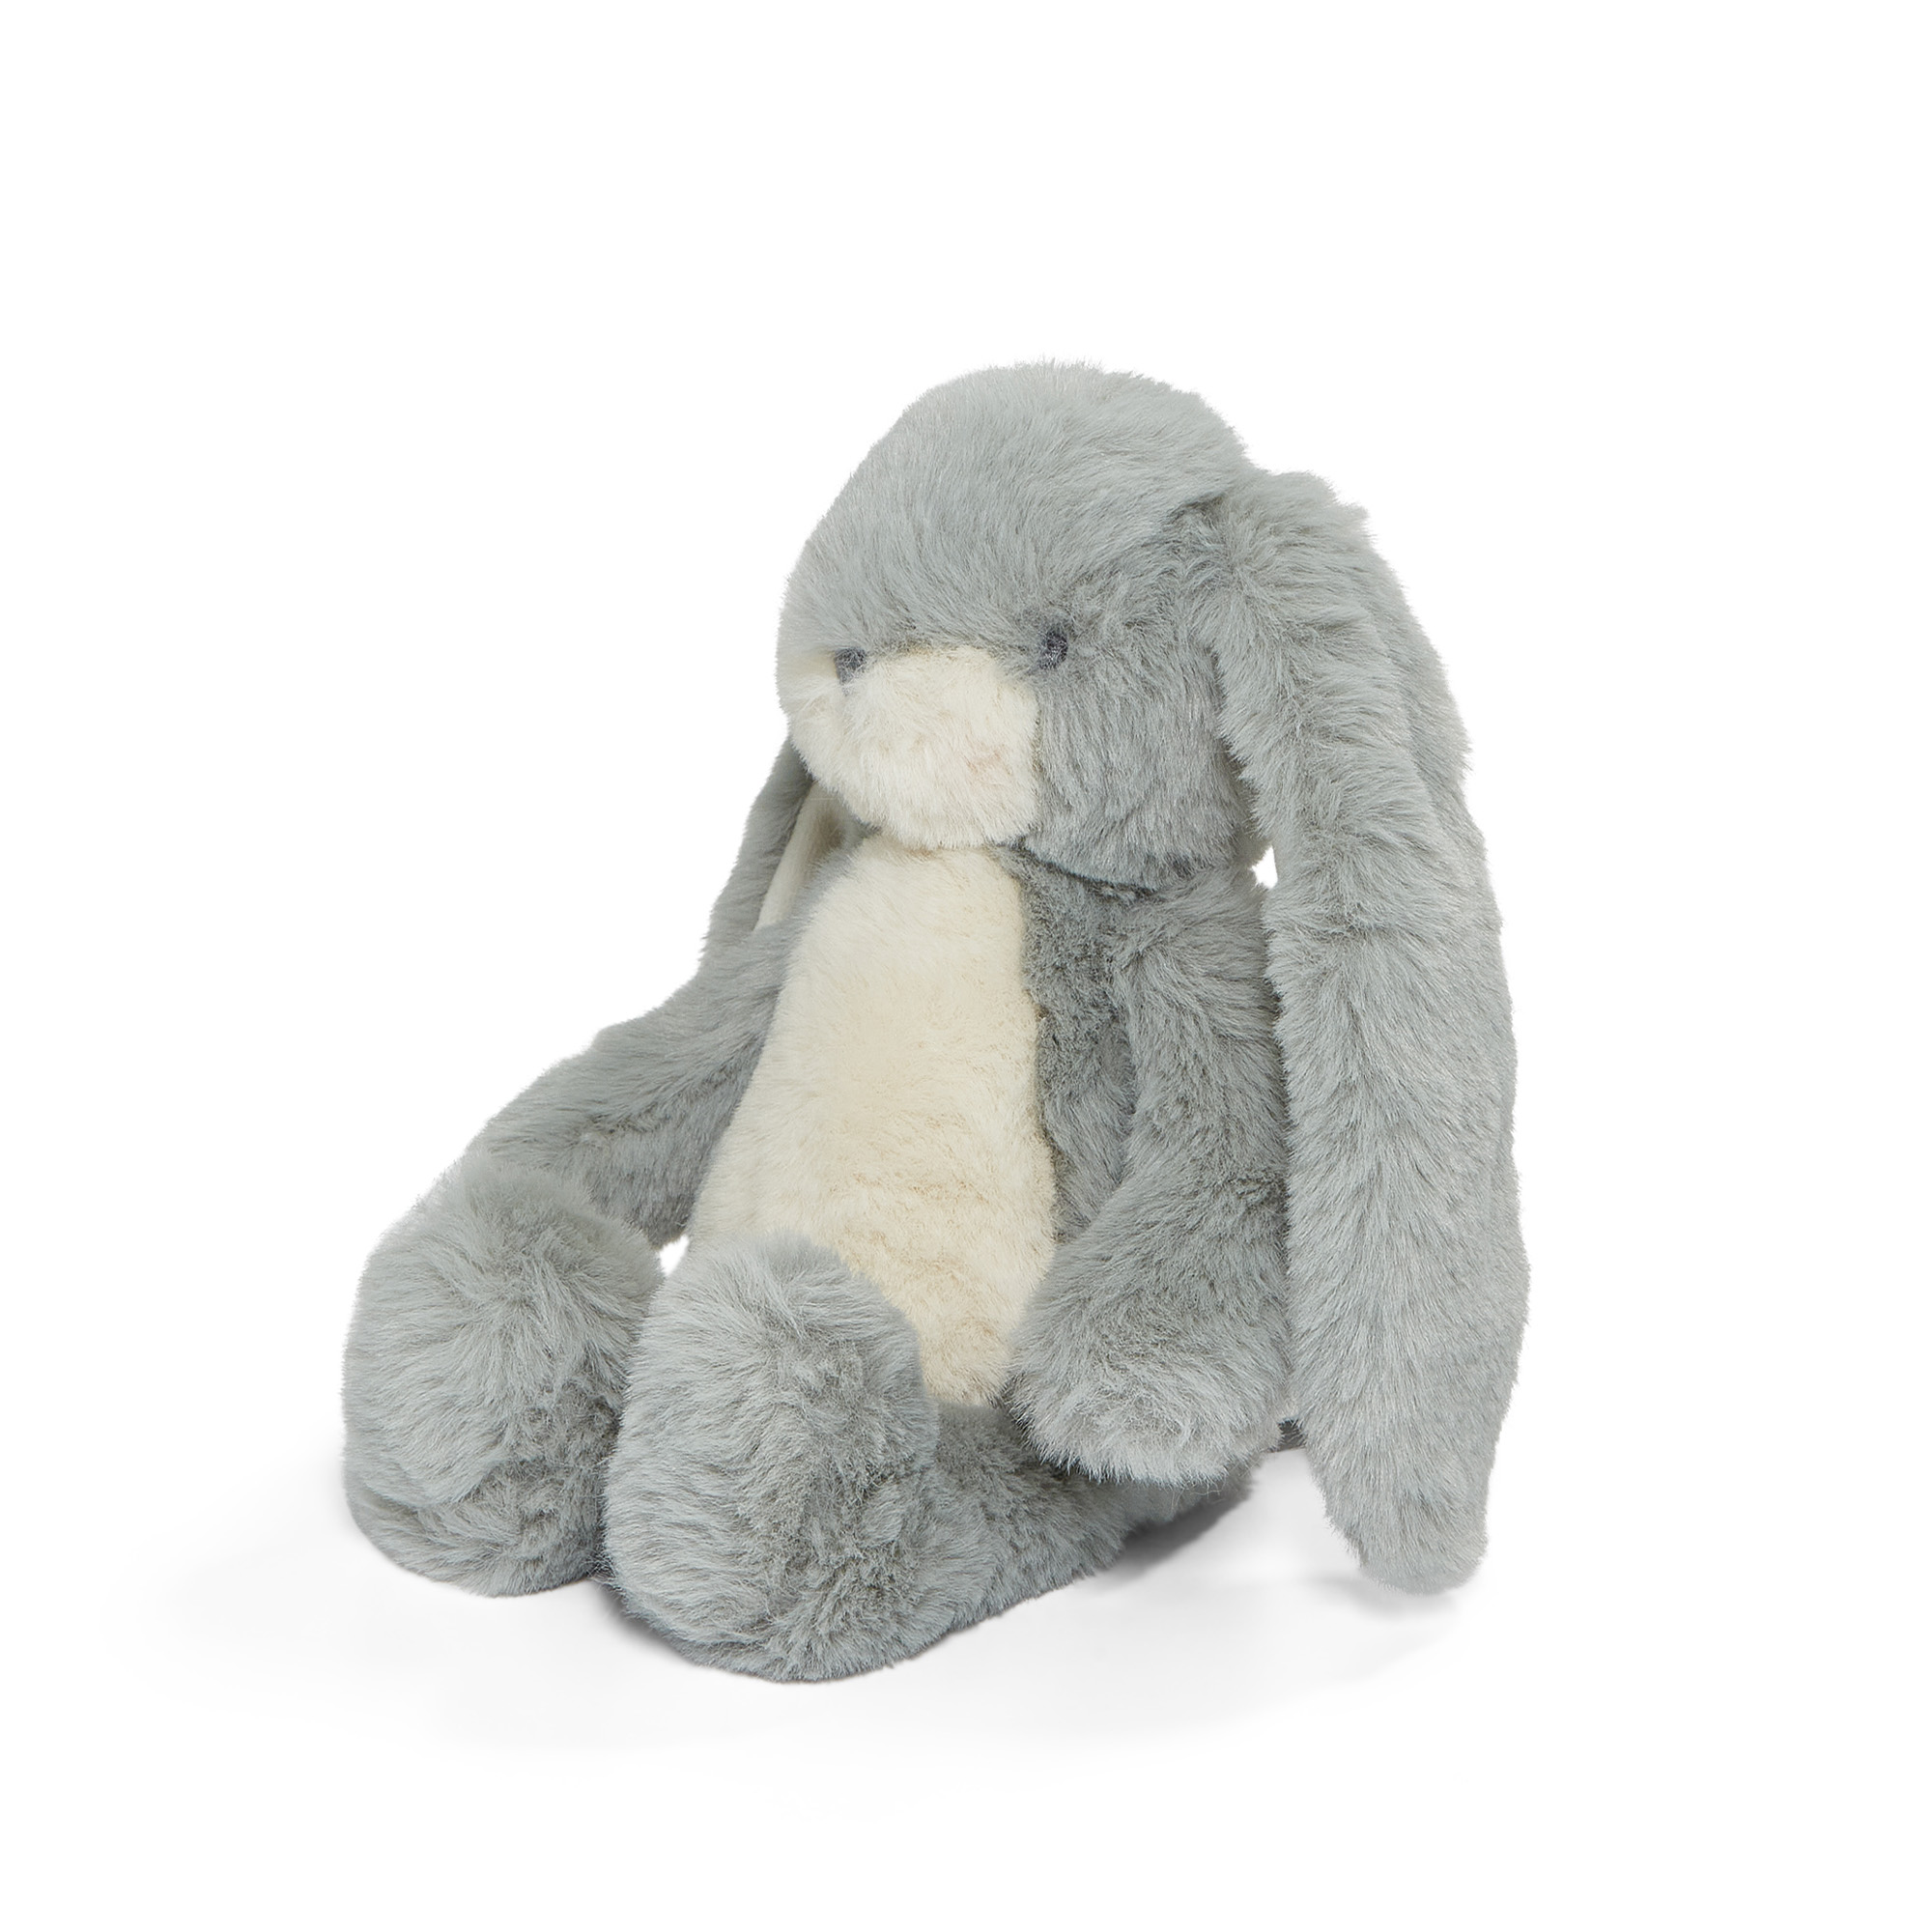 Peluche Wee Nibble Lilac Marble Bunny 20 cm - Bunnies By The Bay